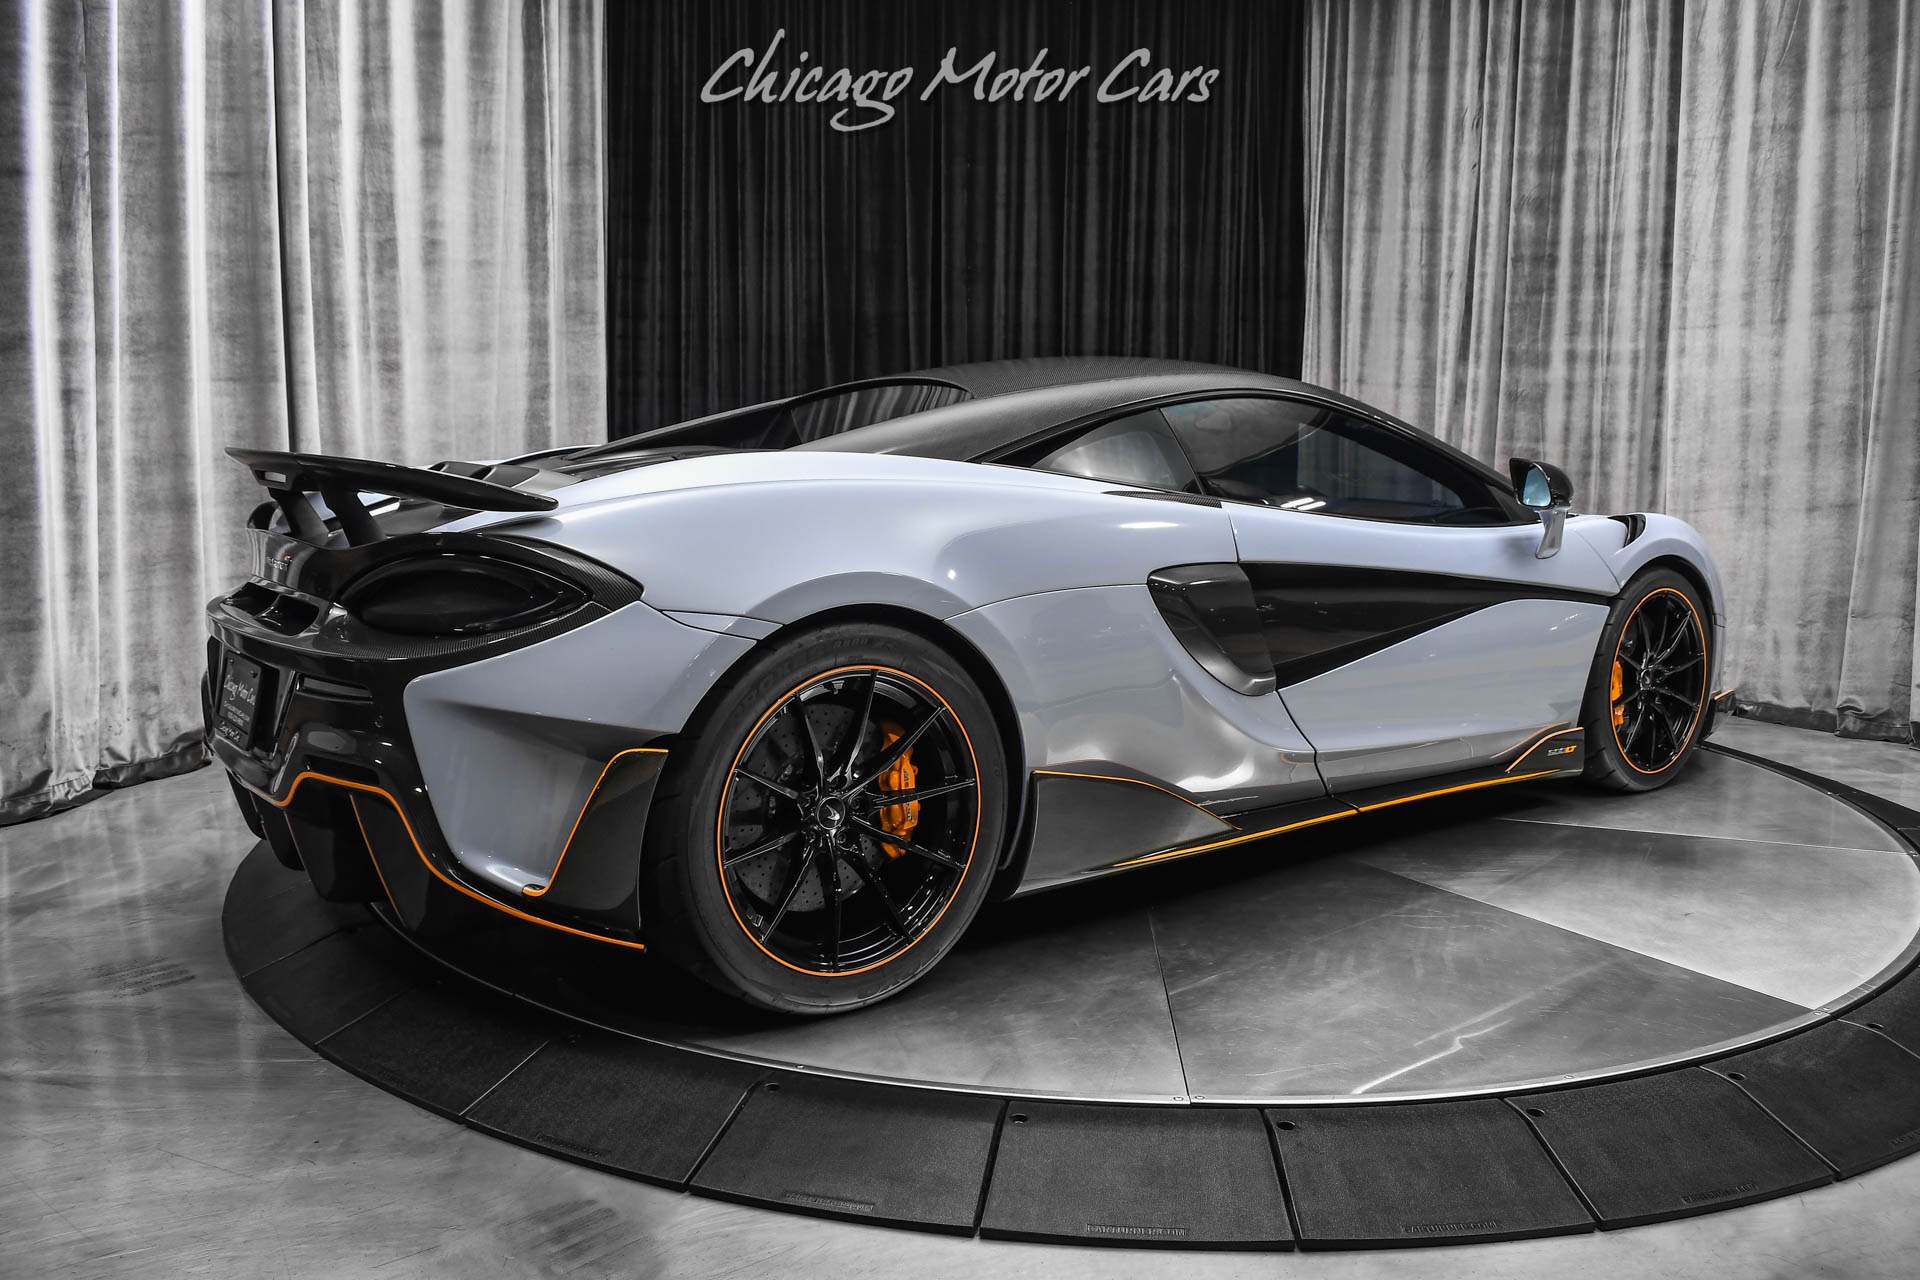 Used-2019-McLaren-600LT-Coupe-HUGE-MSRP-MSO-Ceramic-Gray-MSO-Clubsport-Pack-TONS-of-Carbon-PPF